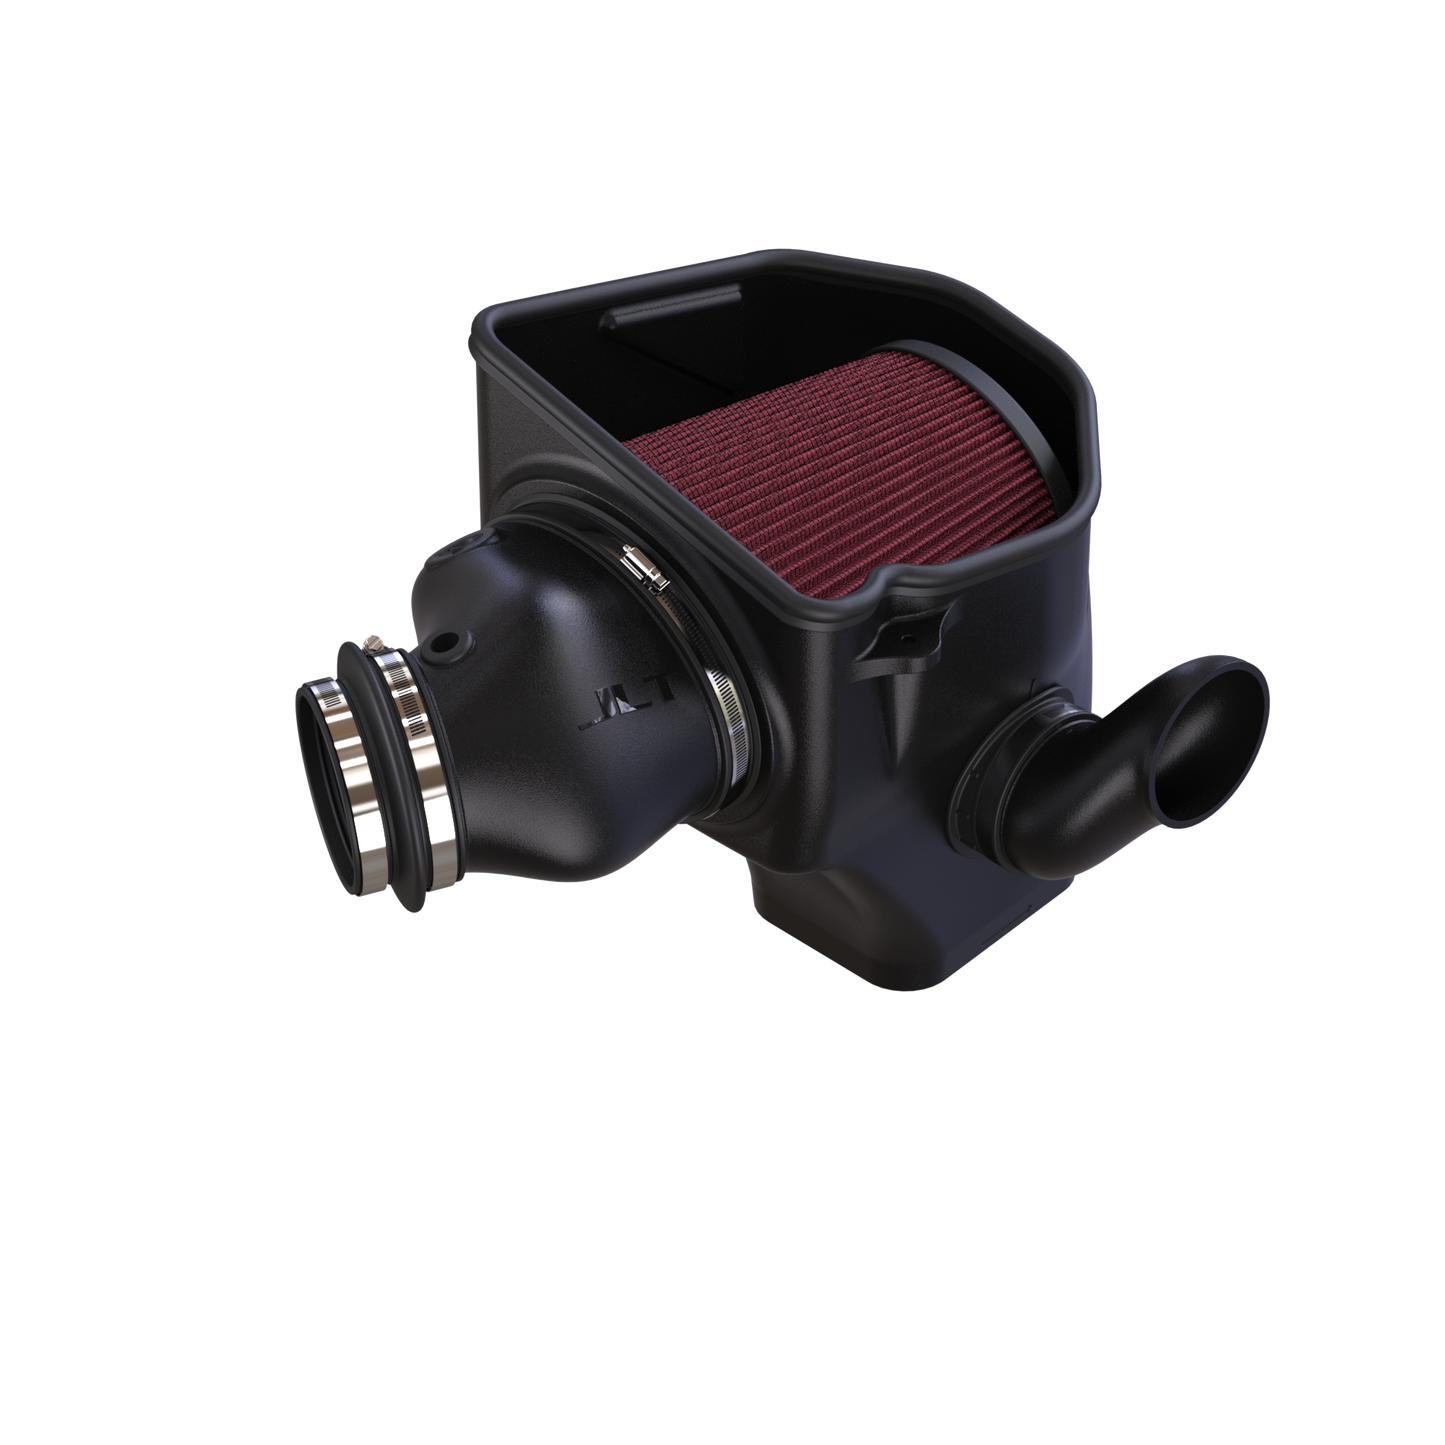 JLT Cold Air Intake for 2017-2020 Charger Hellcat & 2017-2018 Challenger Hellcat (Widebody Models Only)